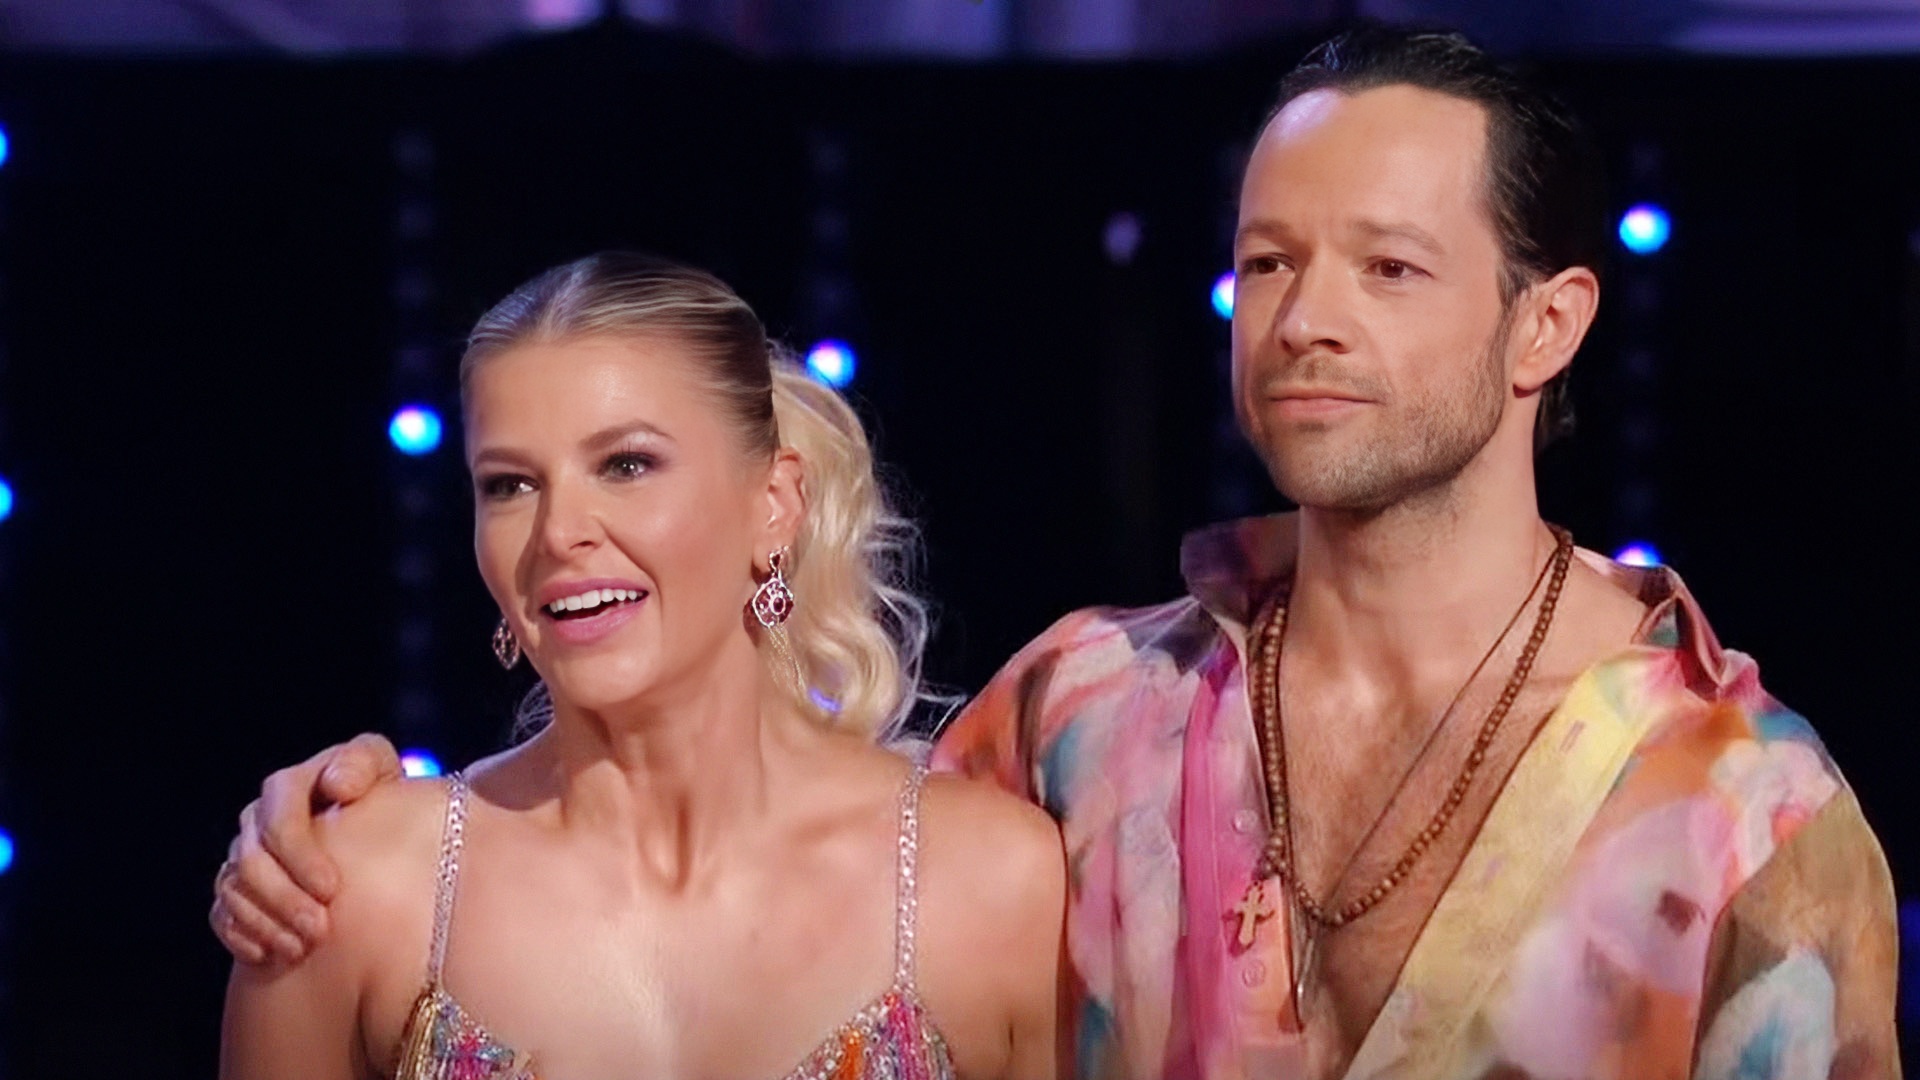 DWTS 32 Finale Predictions: Remaining Celebrity Couples Ranked by Their Likelihood to Win